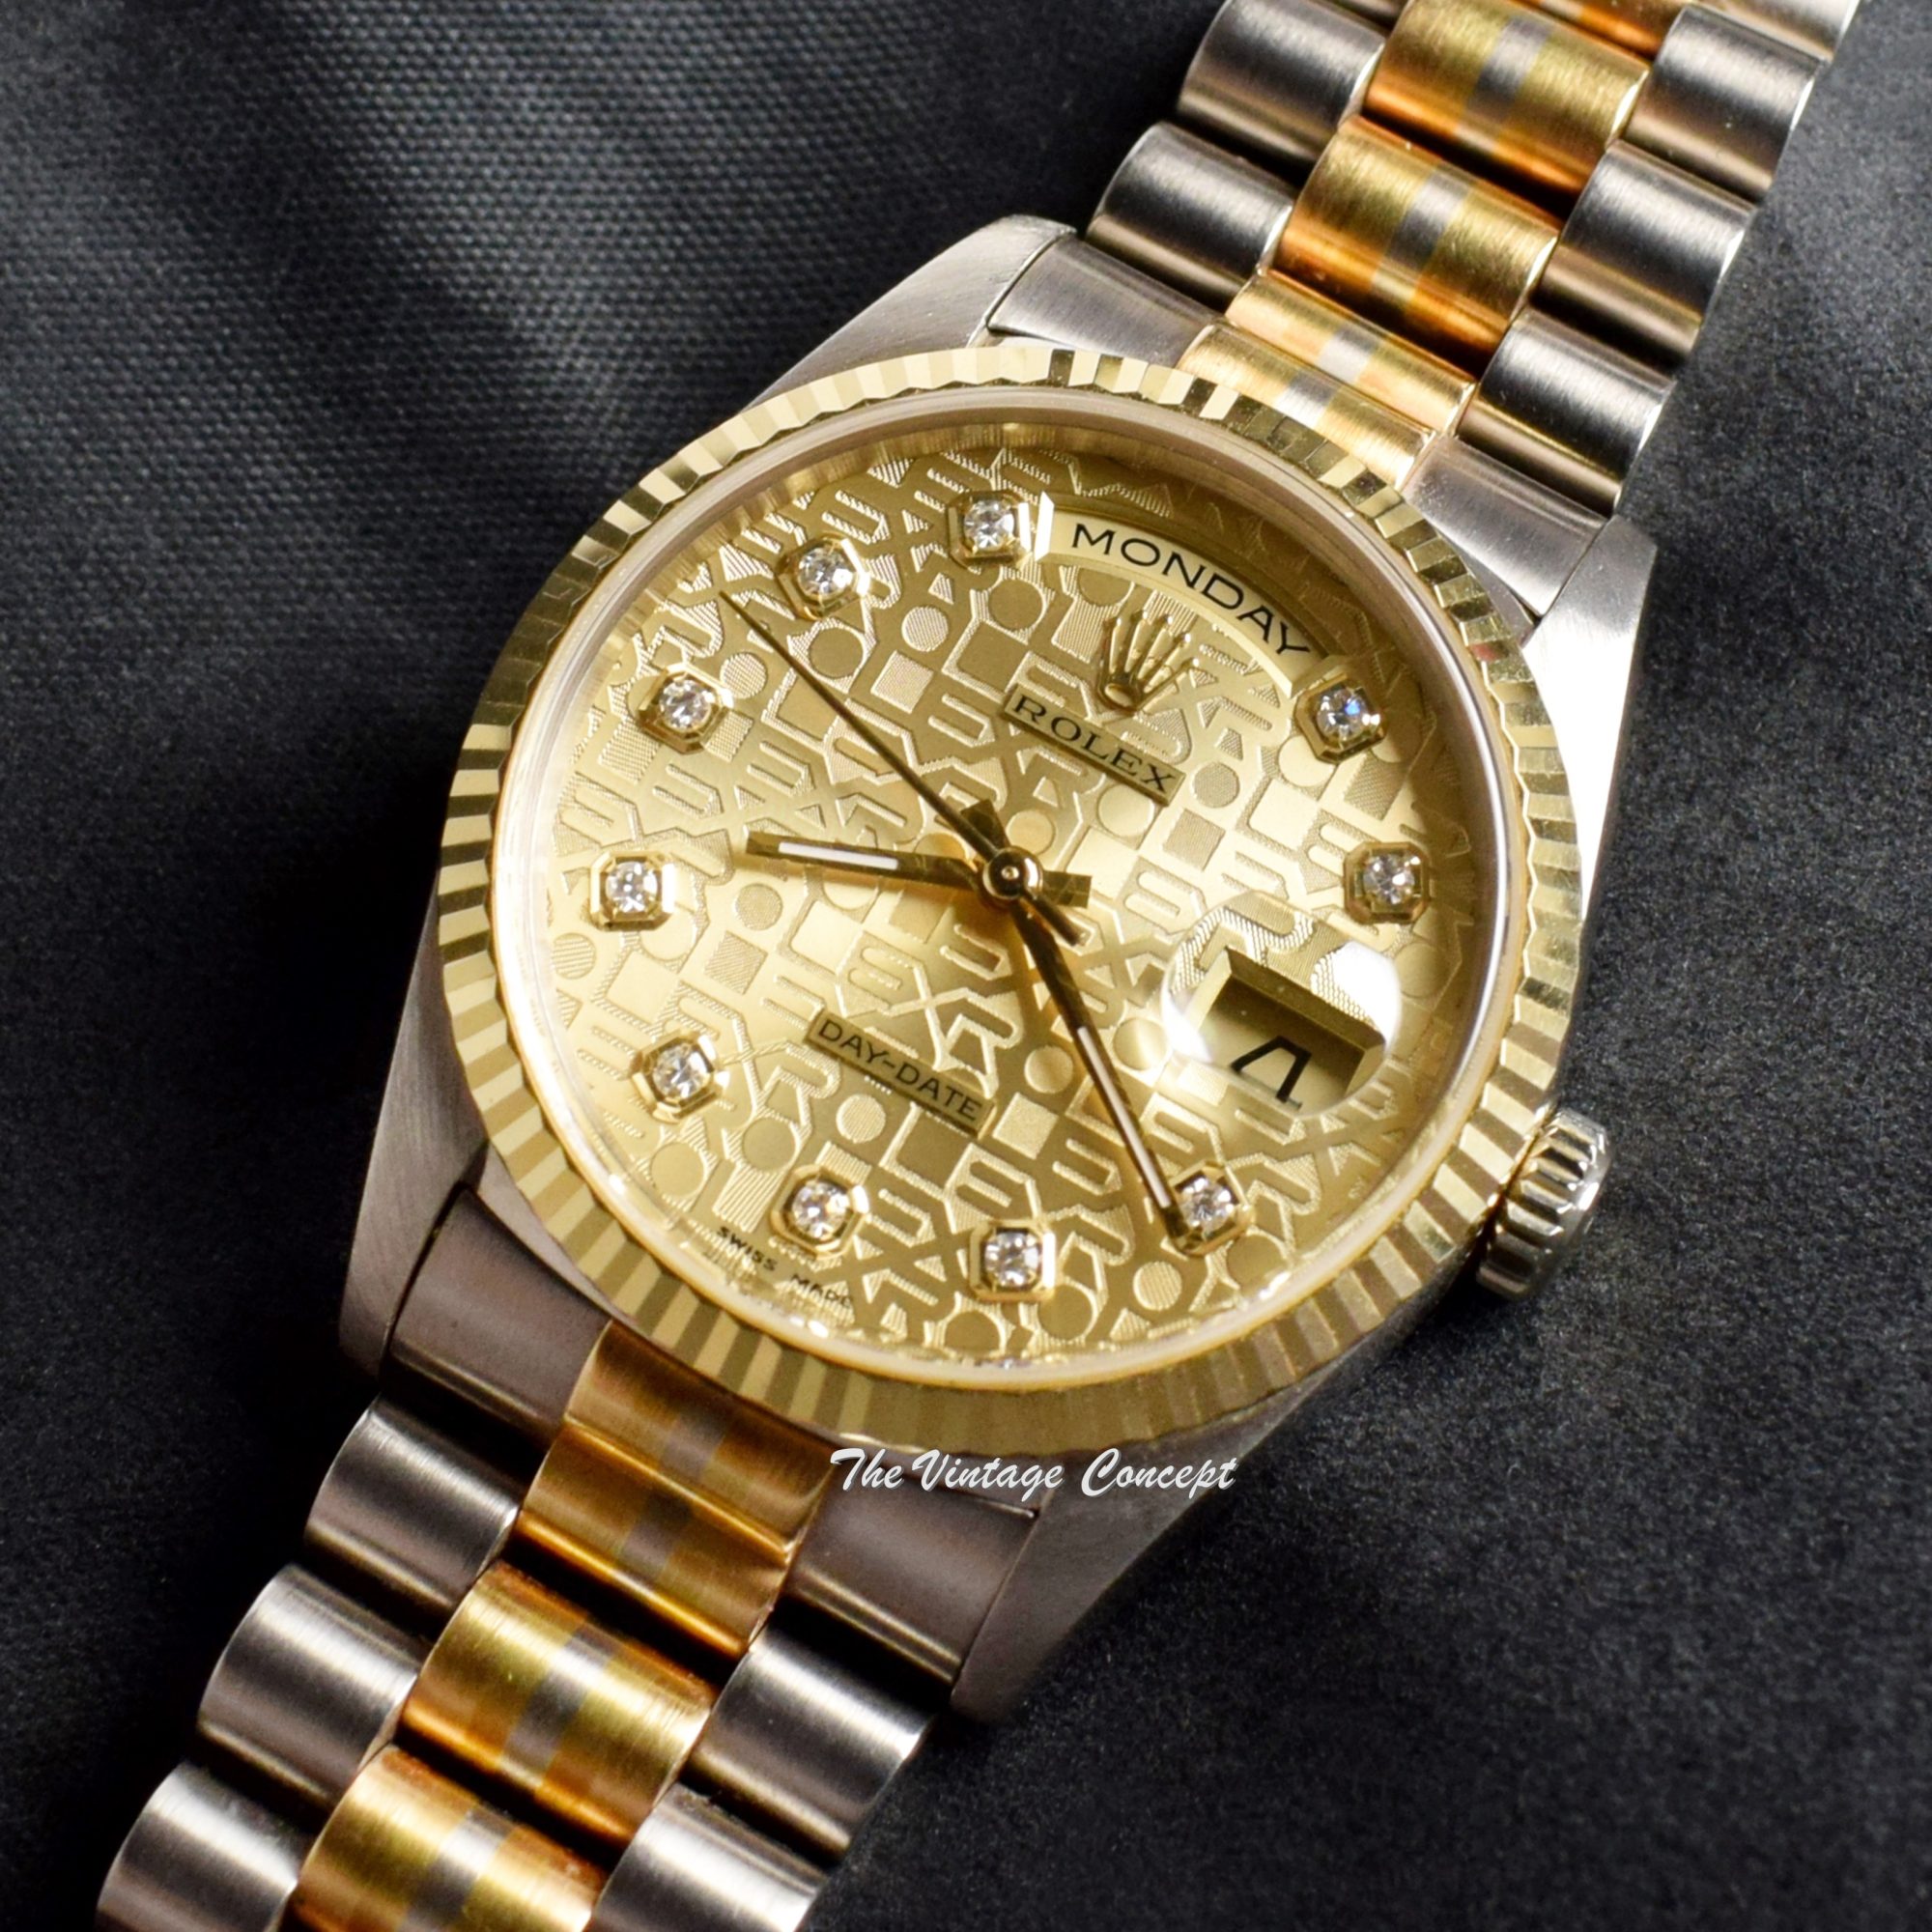 Rolex Day-Date Tridor 18K Gold Champagne Jubilee Dial w/ Diamond Indexes 18239B & Original Paper - The Vintage Concept